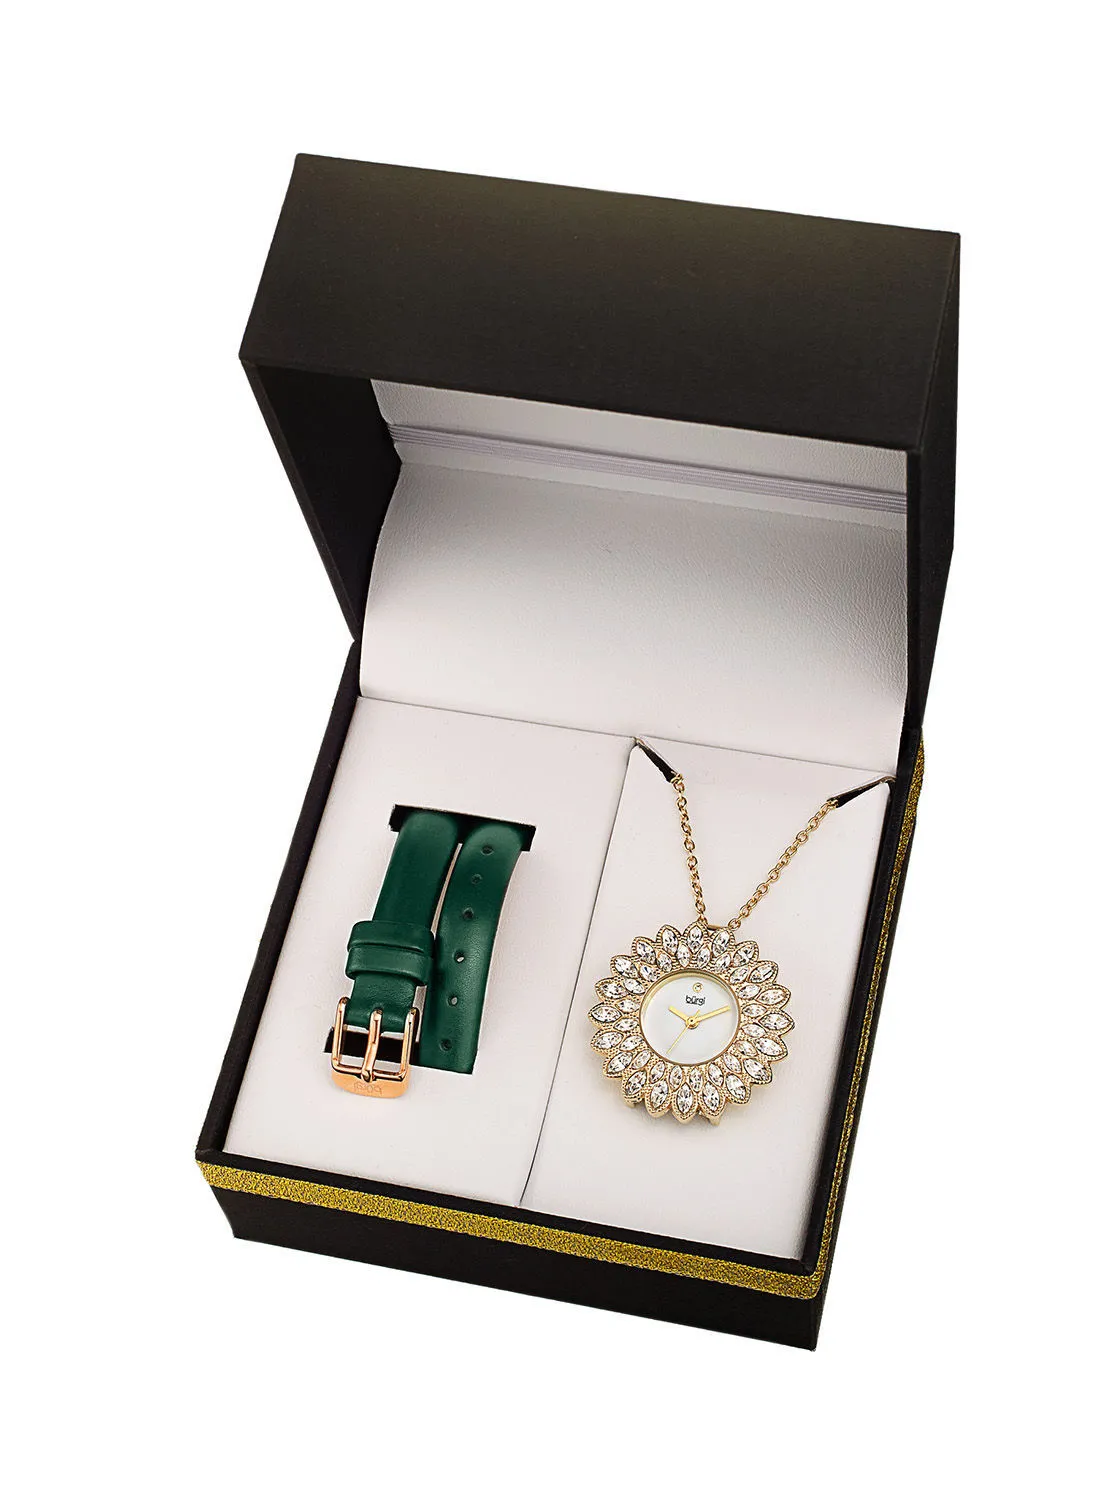 Burgi Ladies Interchangeable Watch and Pendant Necklace Set, in Gold Plating, Clear Swarovski Crystals and Green Leather Strap, and Gold Plated Necklace Chain